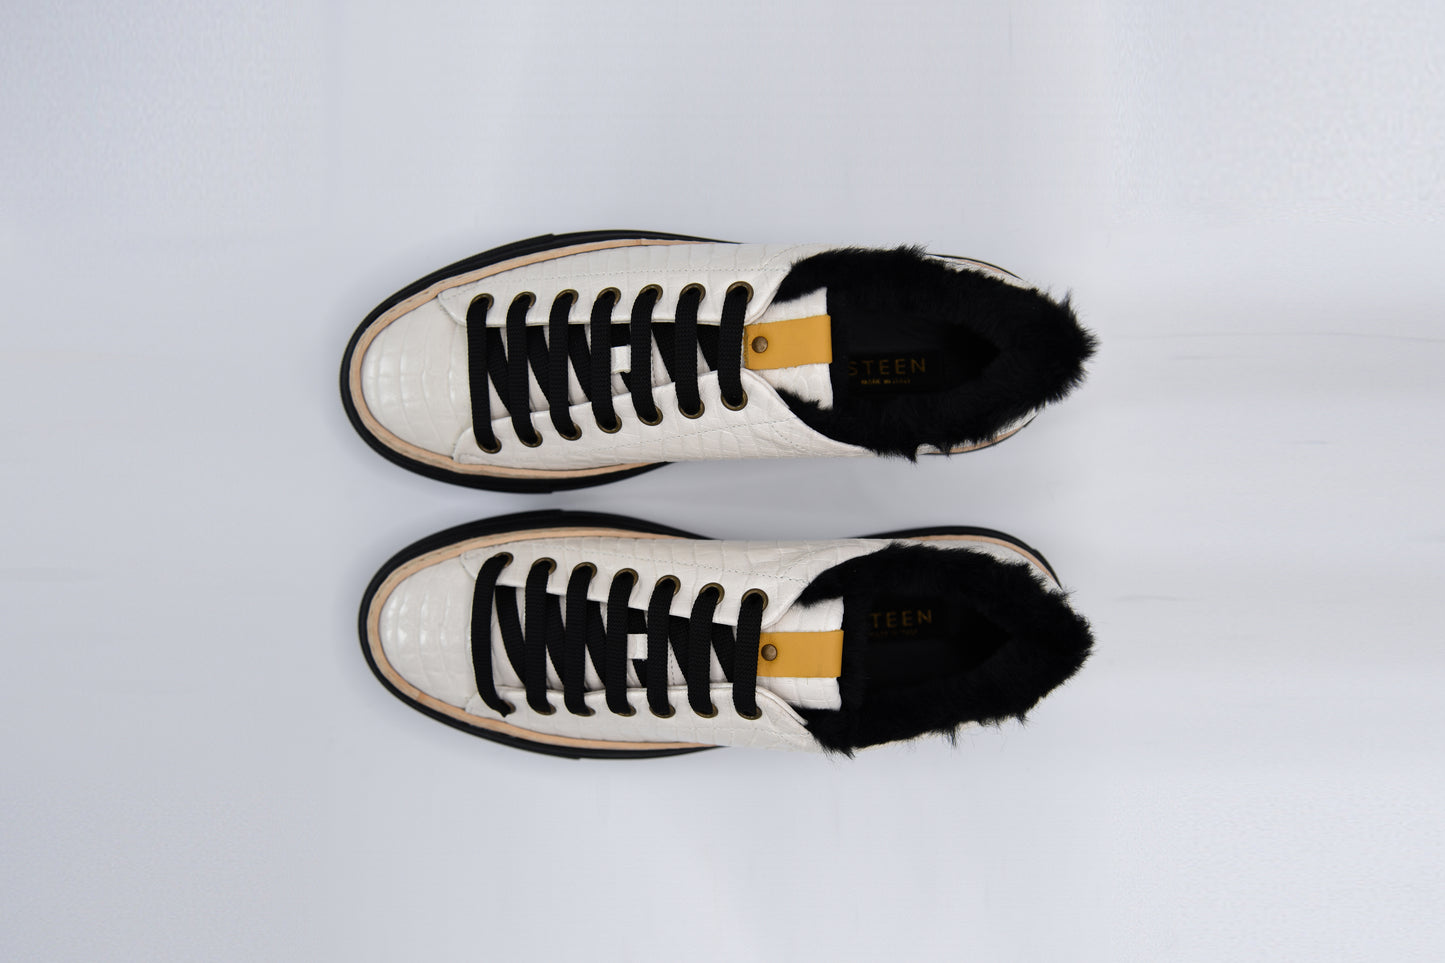 Women’s White Leather Sneakers with Black Eco-Fur